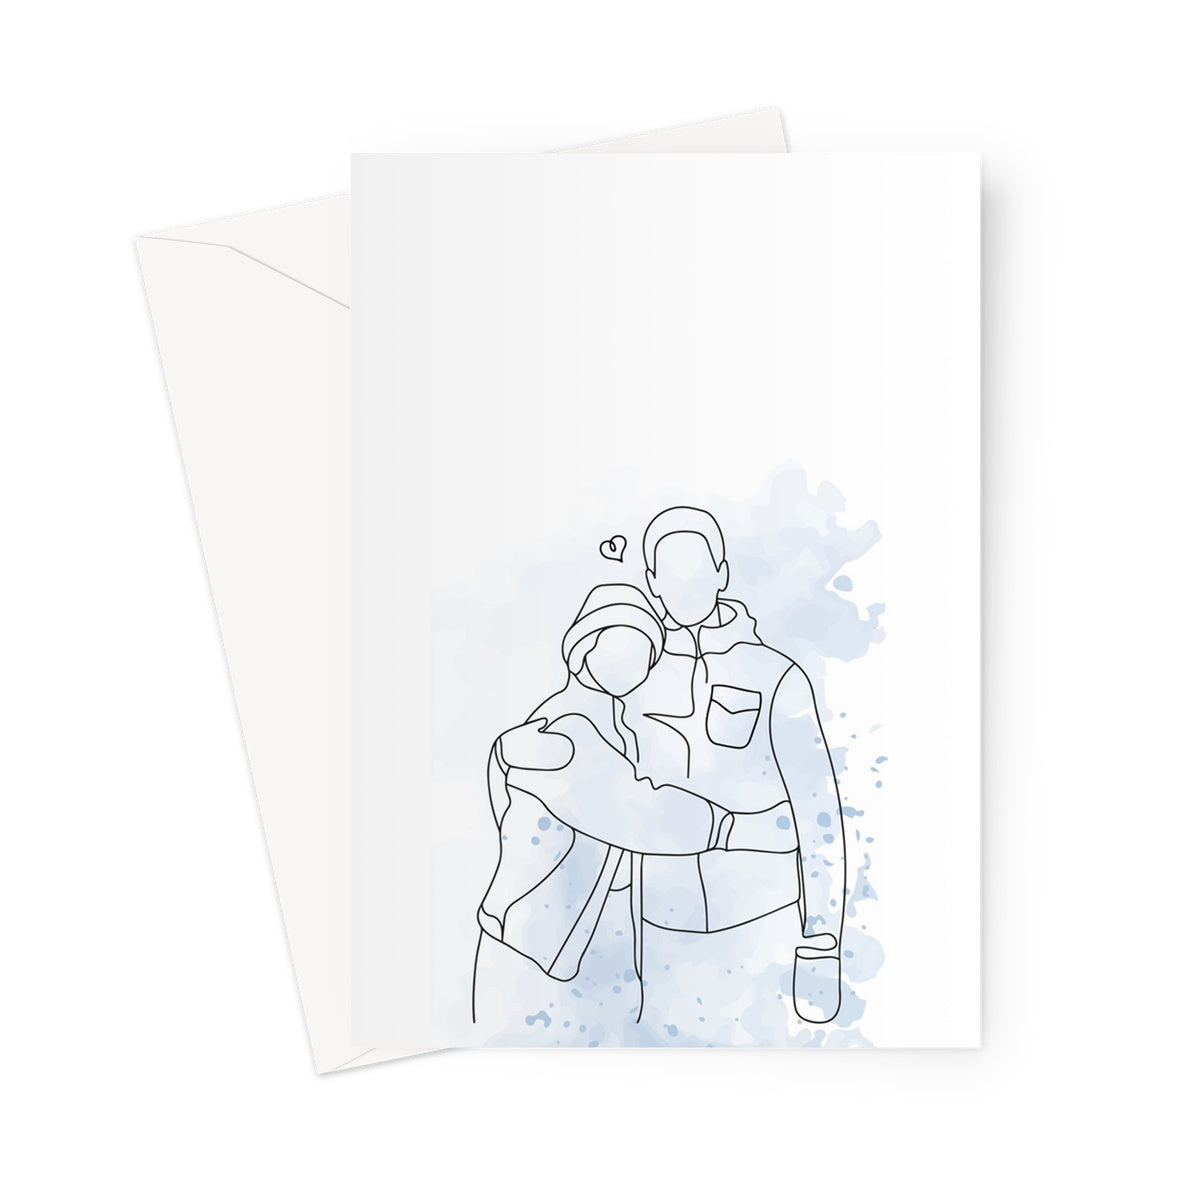 Lovers Line Drawing Greeting Card